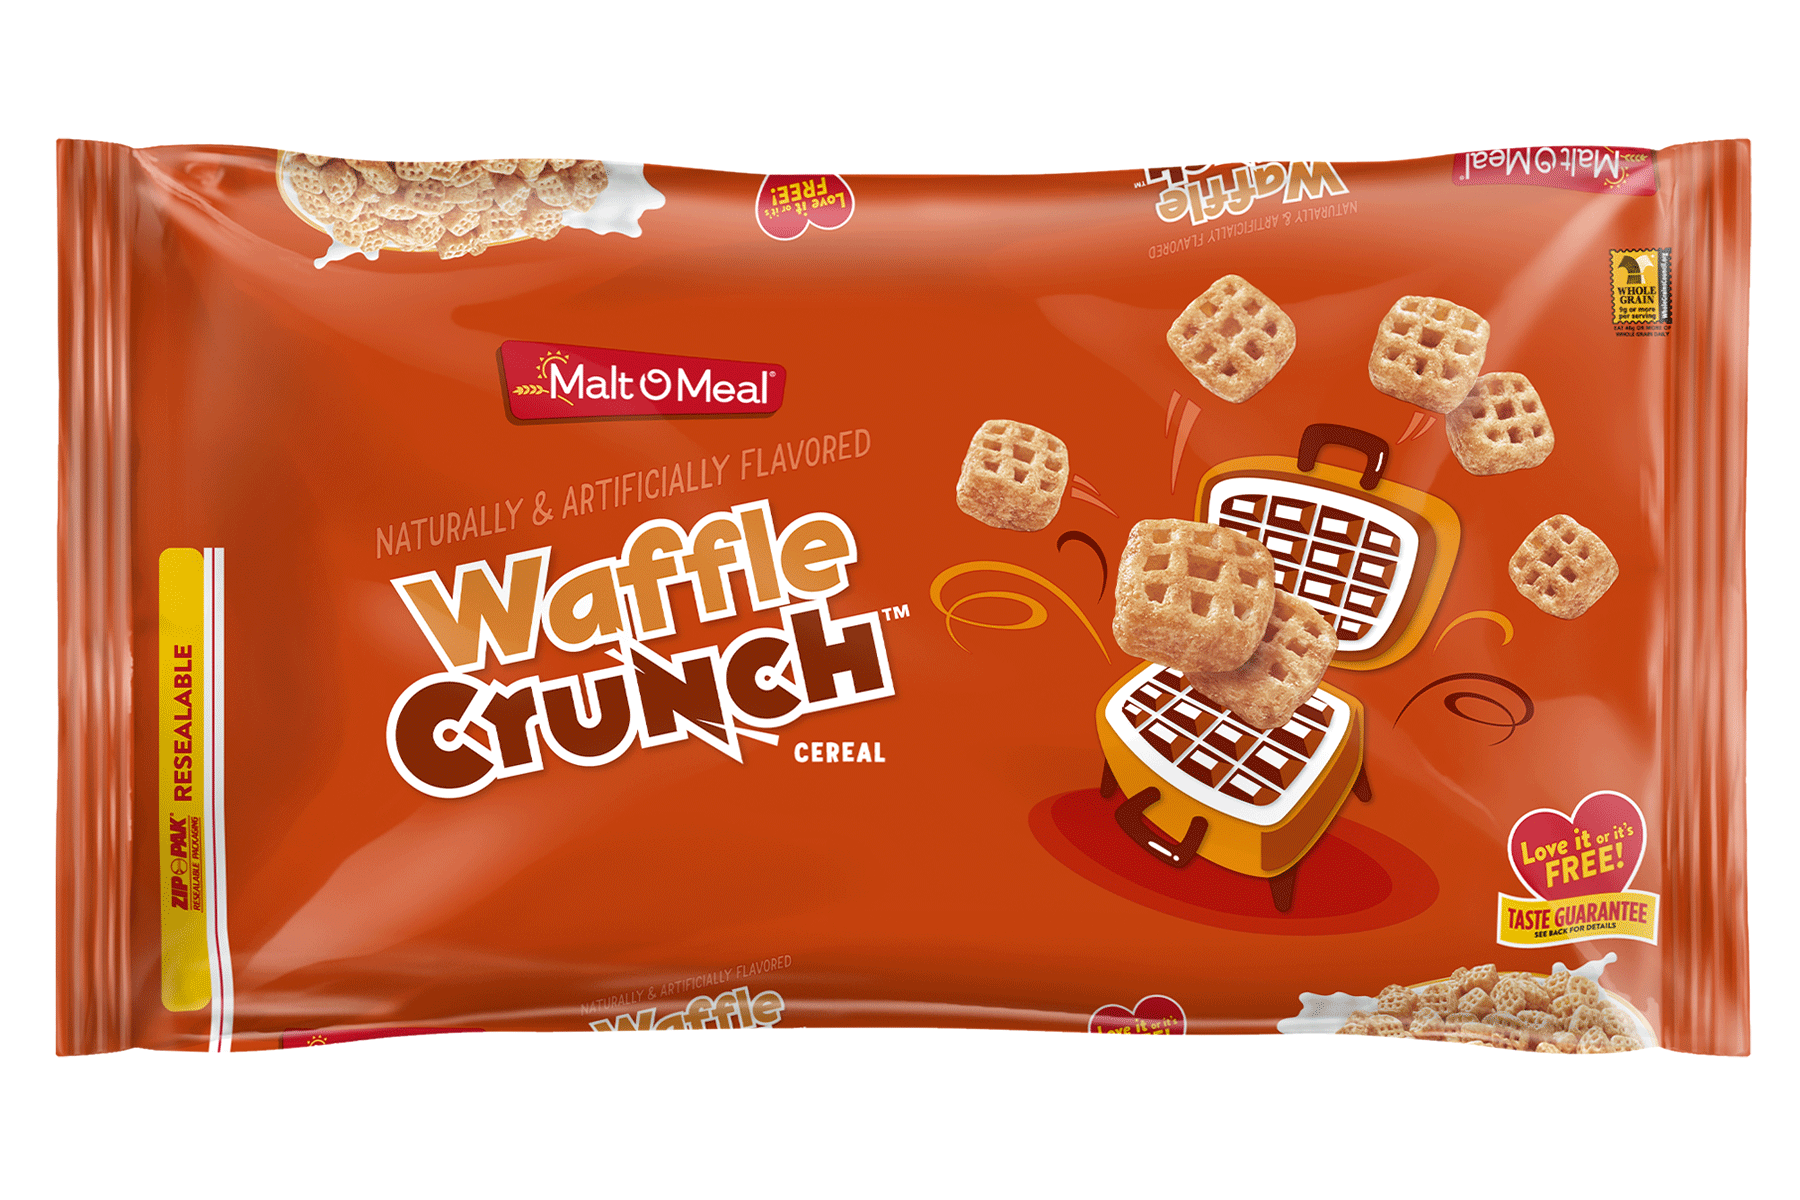 Waffle Crunch cereal packaging